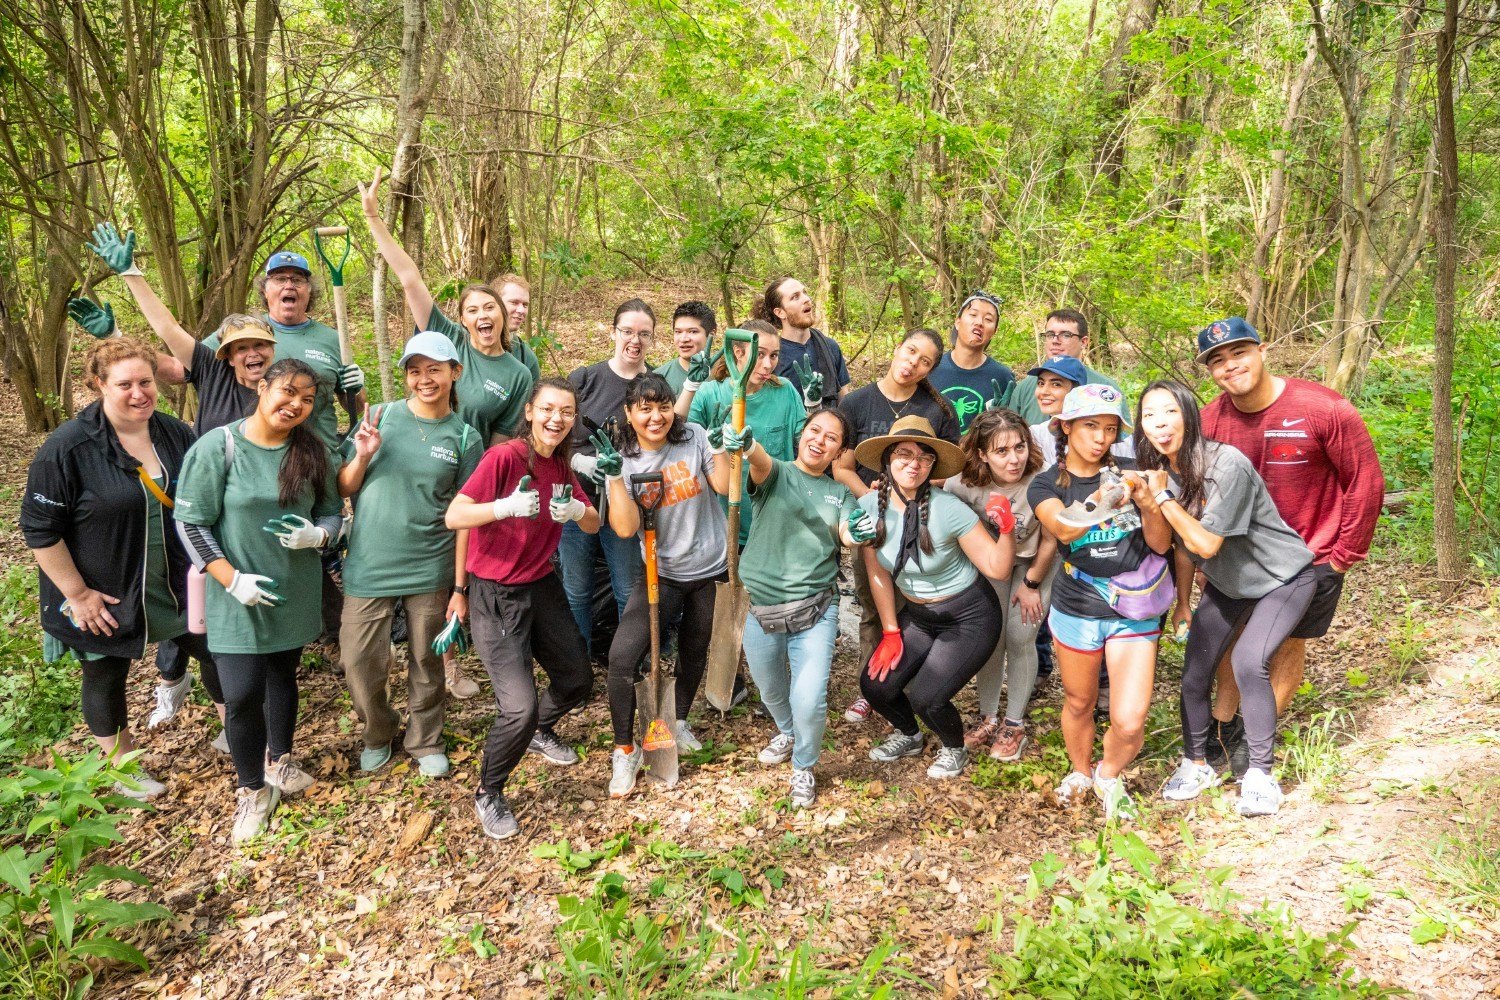 Team Natera volunteered during Earth Month in Austin, Texas for a park clean-up day! 